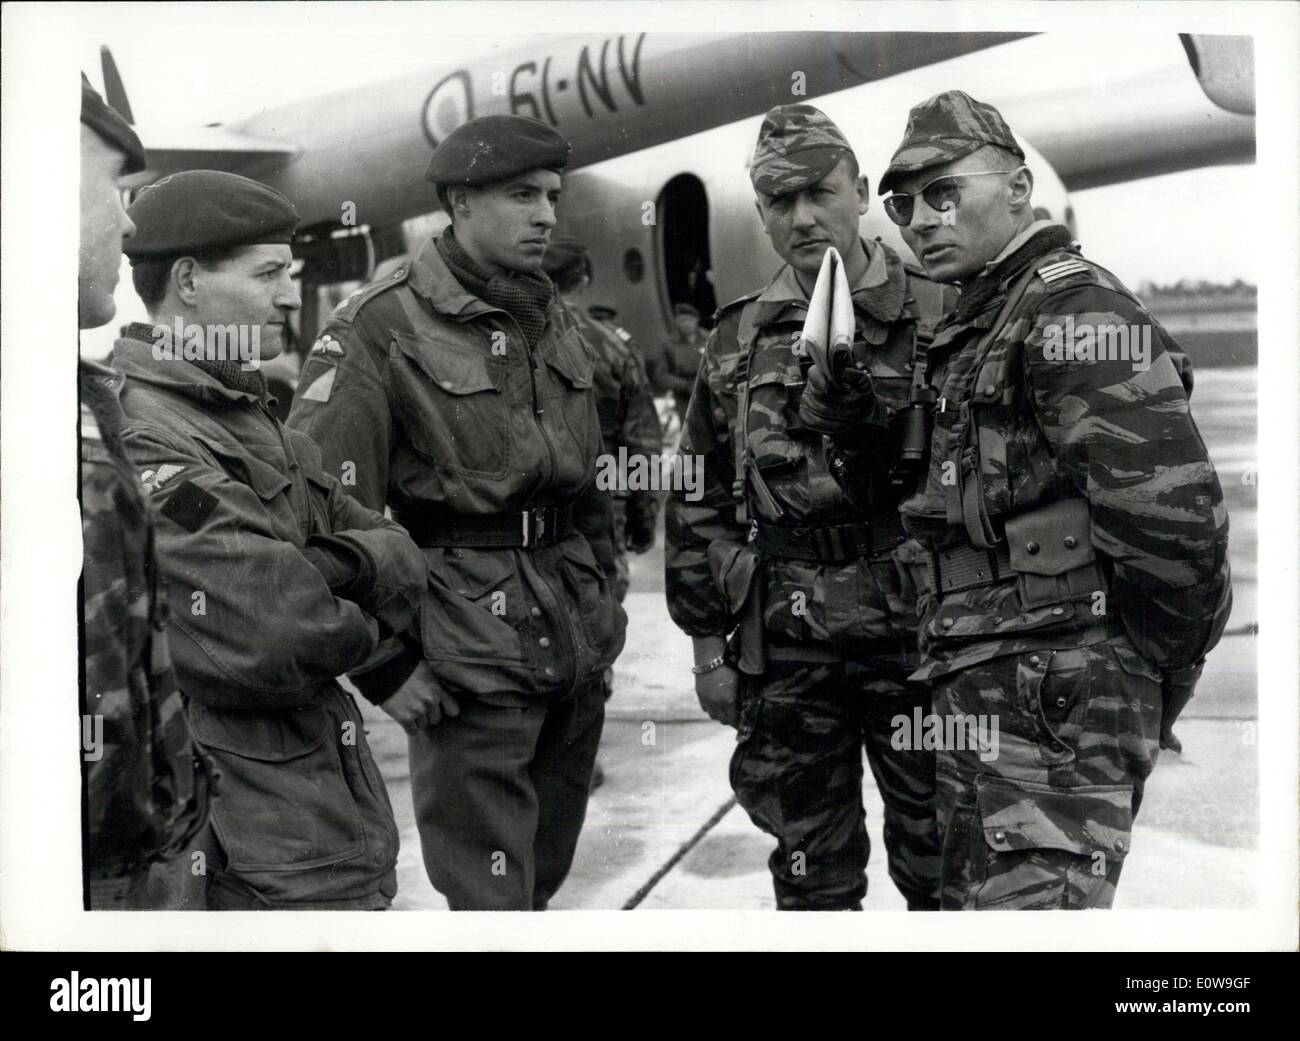 Apr. 03, 1962 - ''Les Para'' Arrive For Joint Exercise: Paratroops from the French Airborne Division arrived at Abbingdon, Berks, this morning to join the 1st Parachute Regiment for Exercise Broad Sweep, during which they'll jump over Dartmoor Photo Shows British Paratroops (at left) talks to two of their French counterparts on their arrival at Abbingdon today. Stock Photo